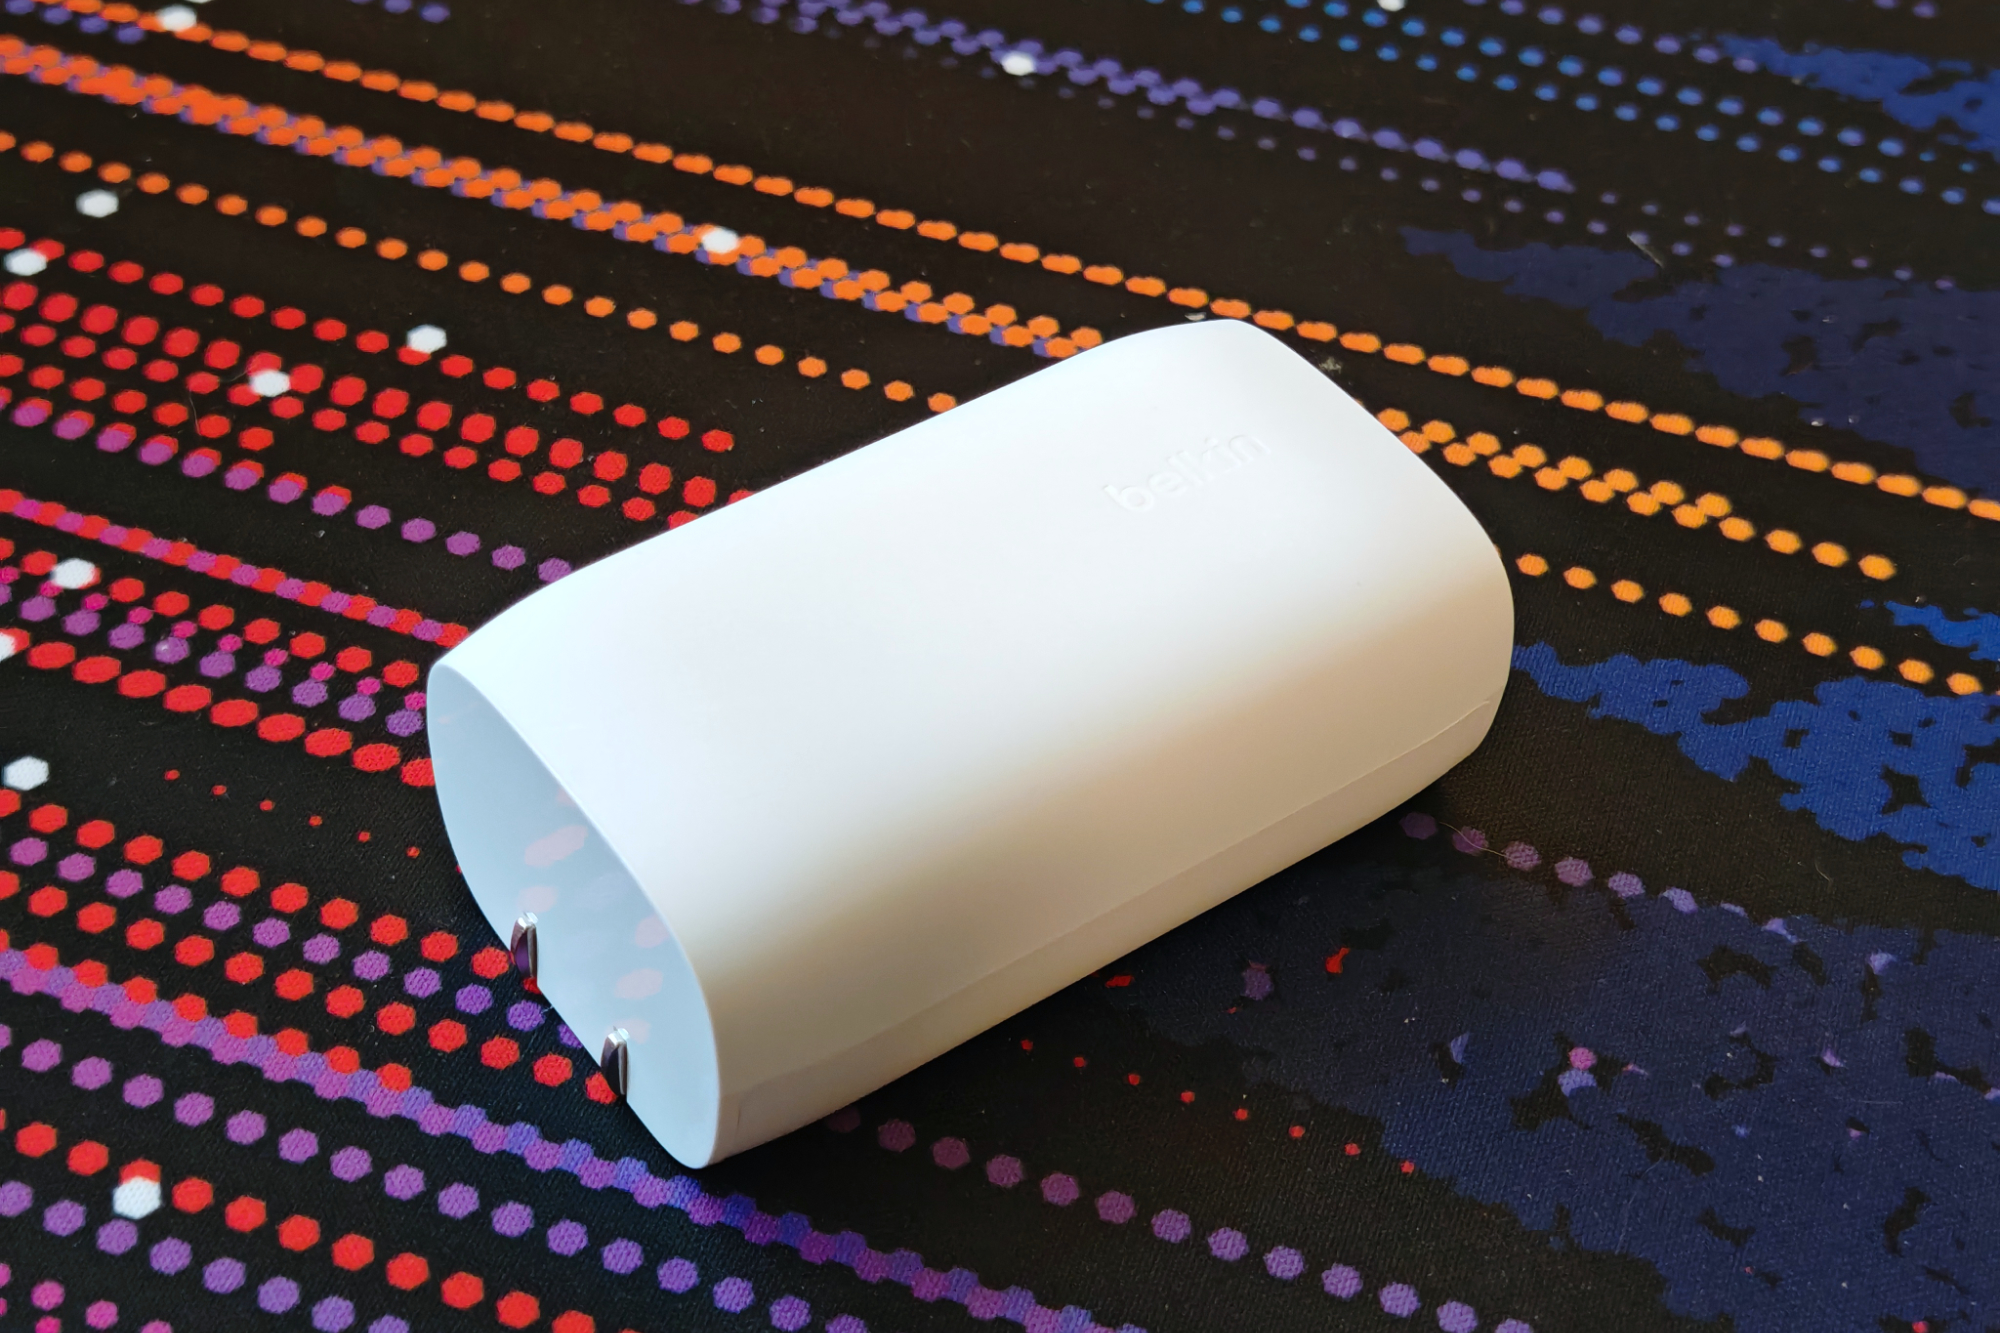 A white Belkin charger laying on a colorful desk mat.